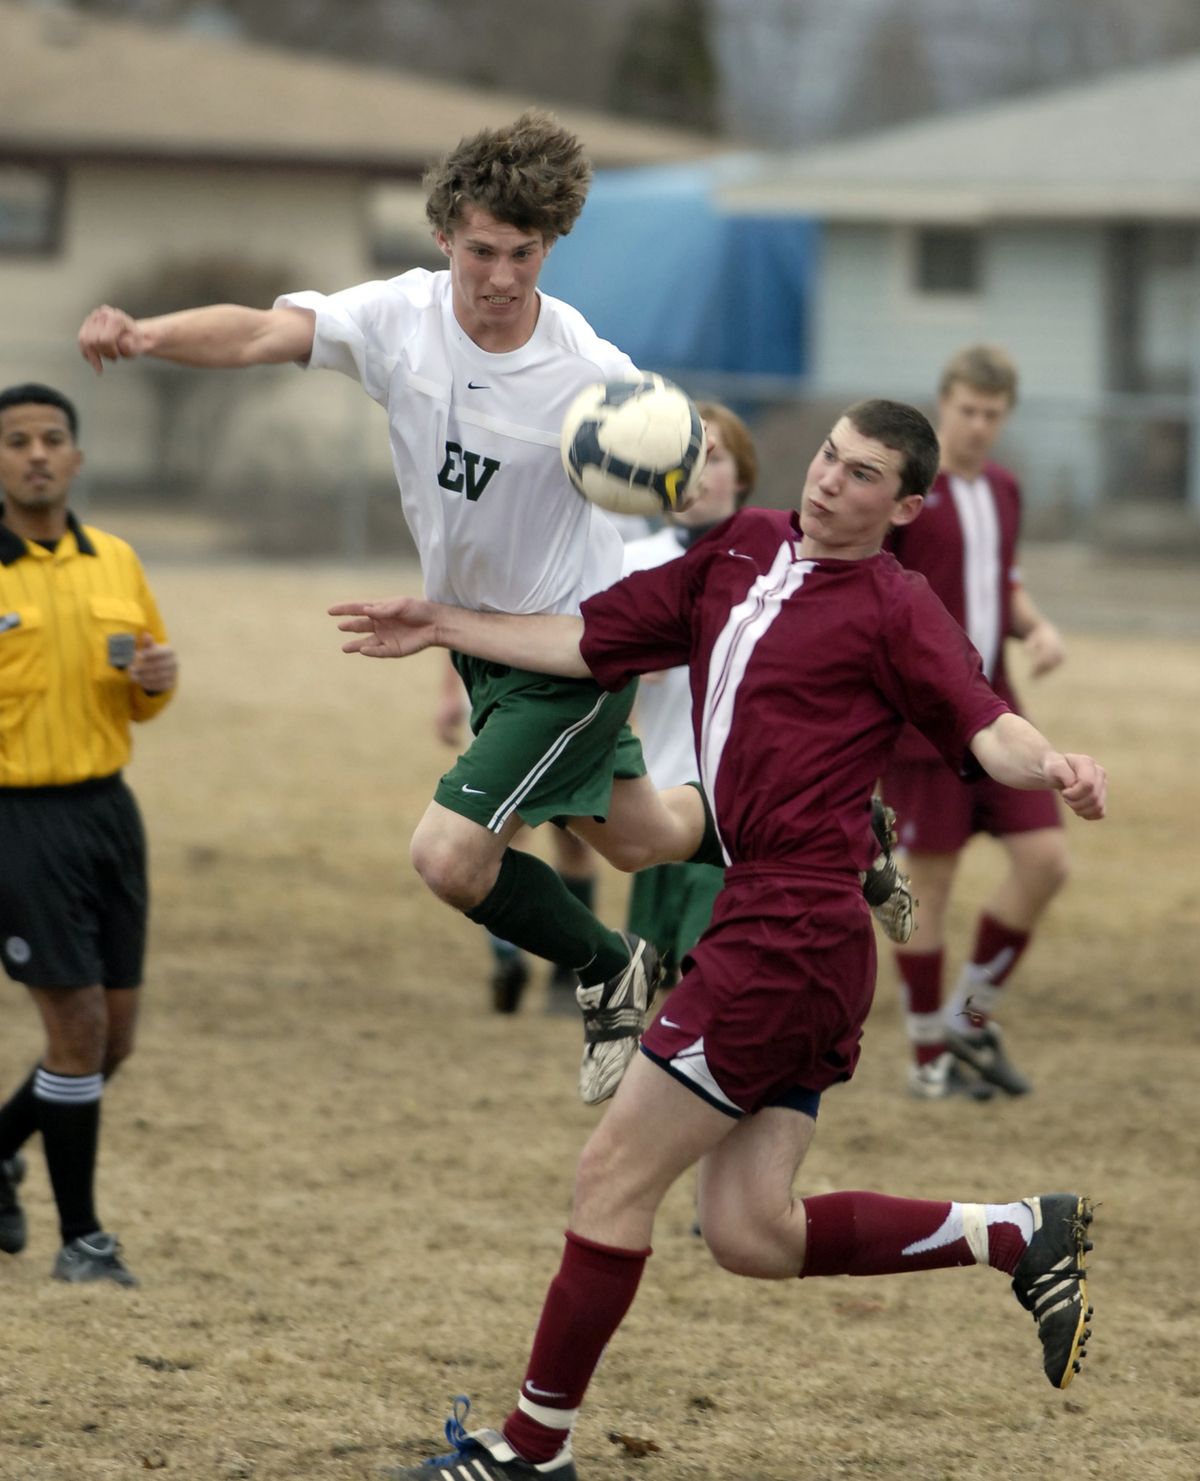 East Valley forward John Gjendem dances through air while concentrating on the ball against University defender Zach Polsin during the first half of their soccer game March 18. U-Hi beat the Knights 1-0.  (Photos by J. BART RAYNIAK / The Spokesman-Review)